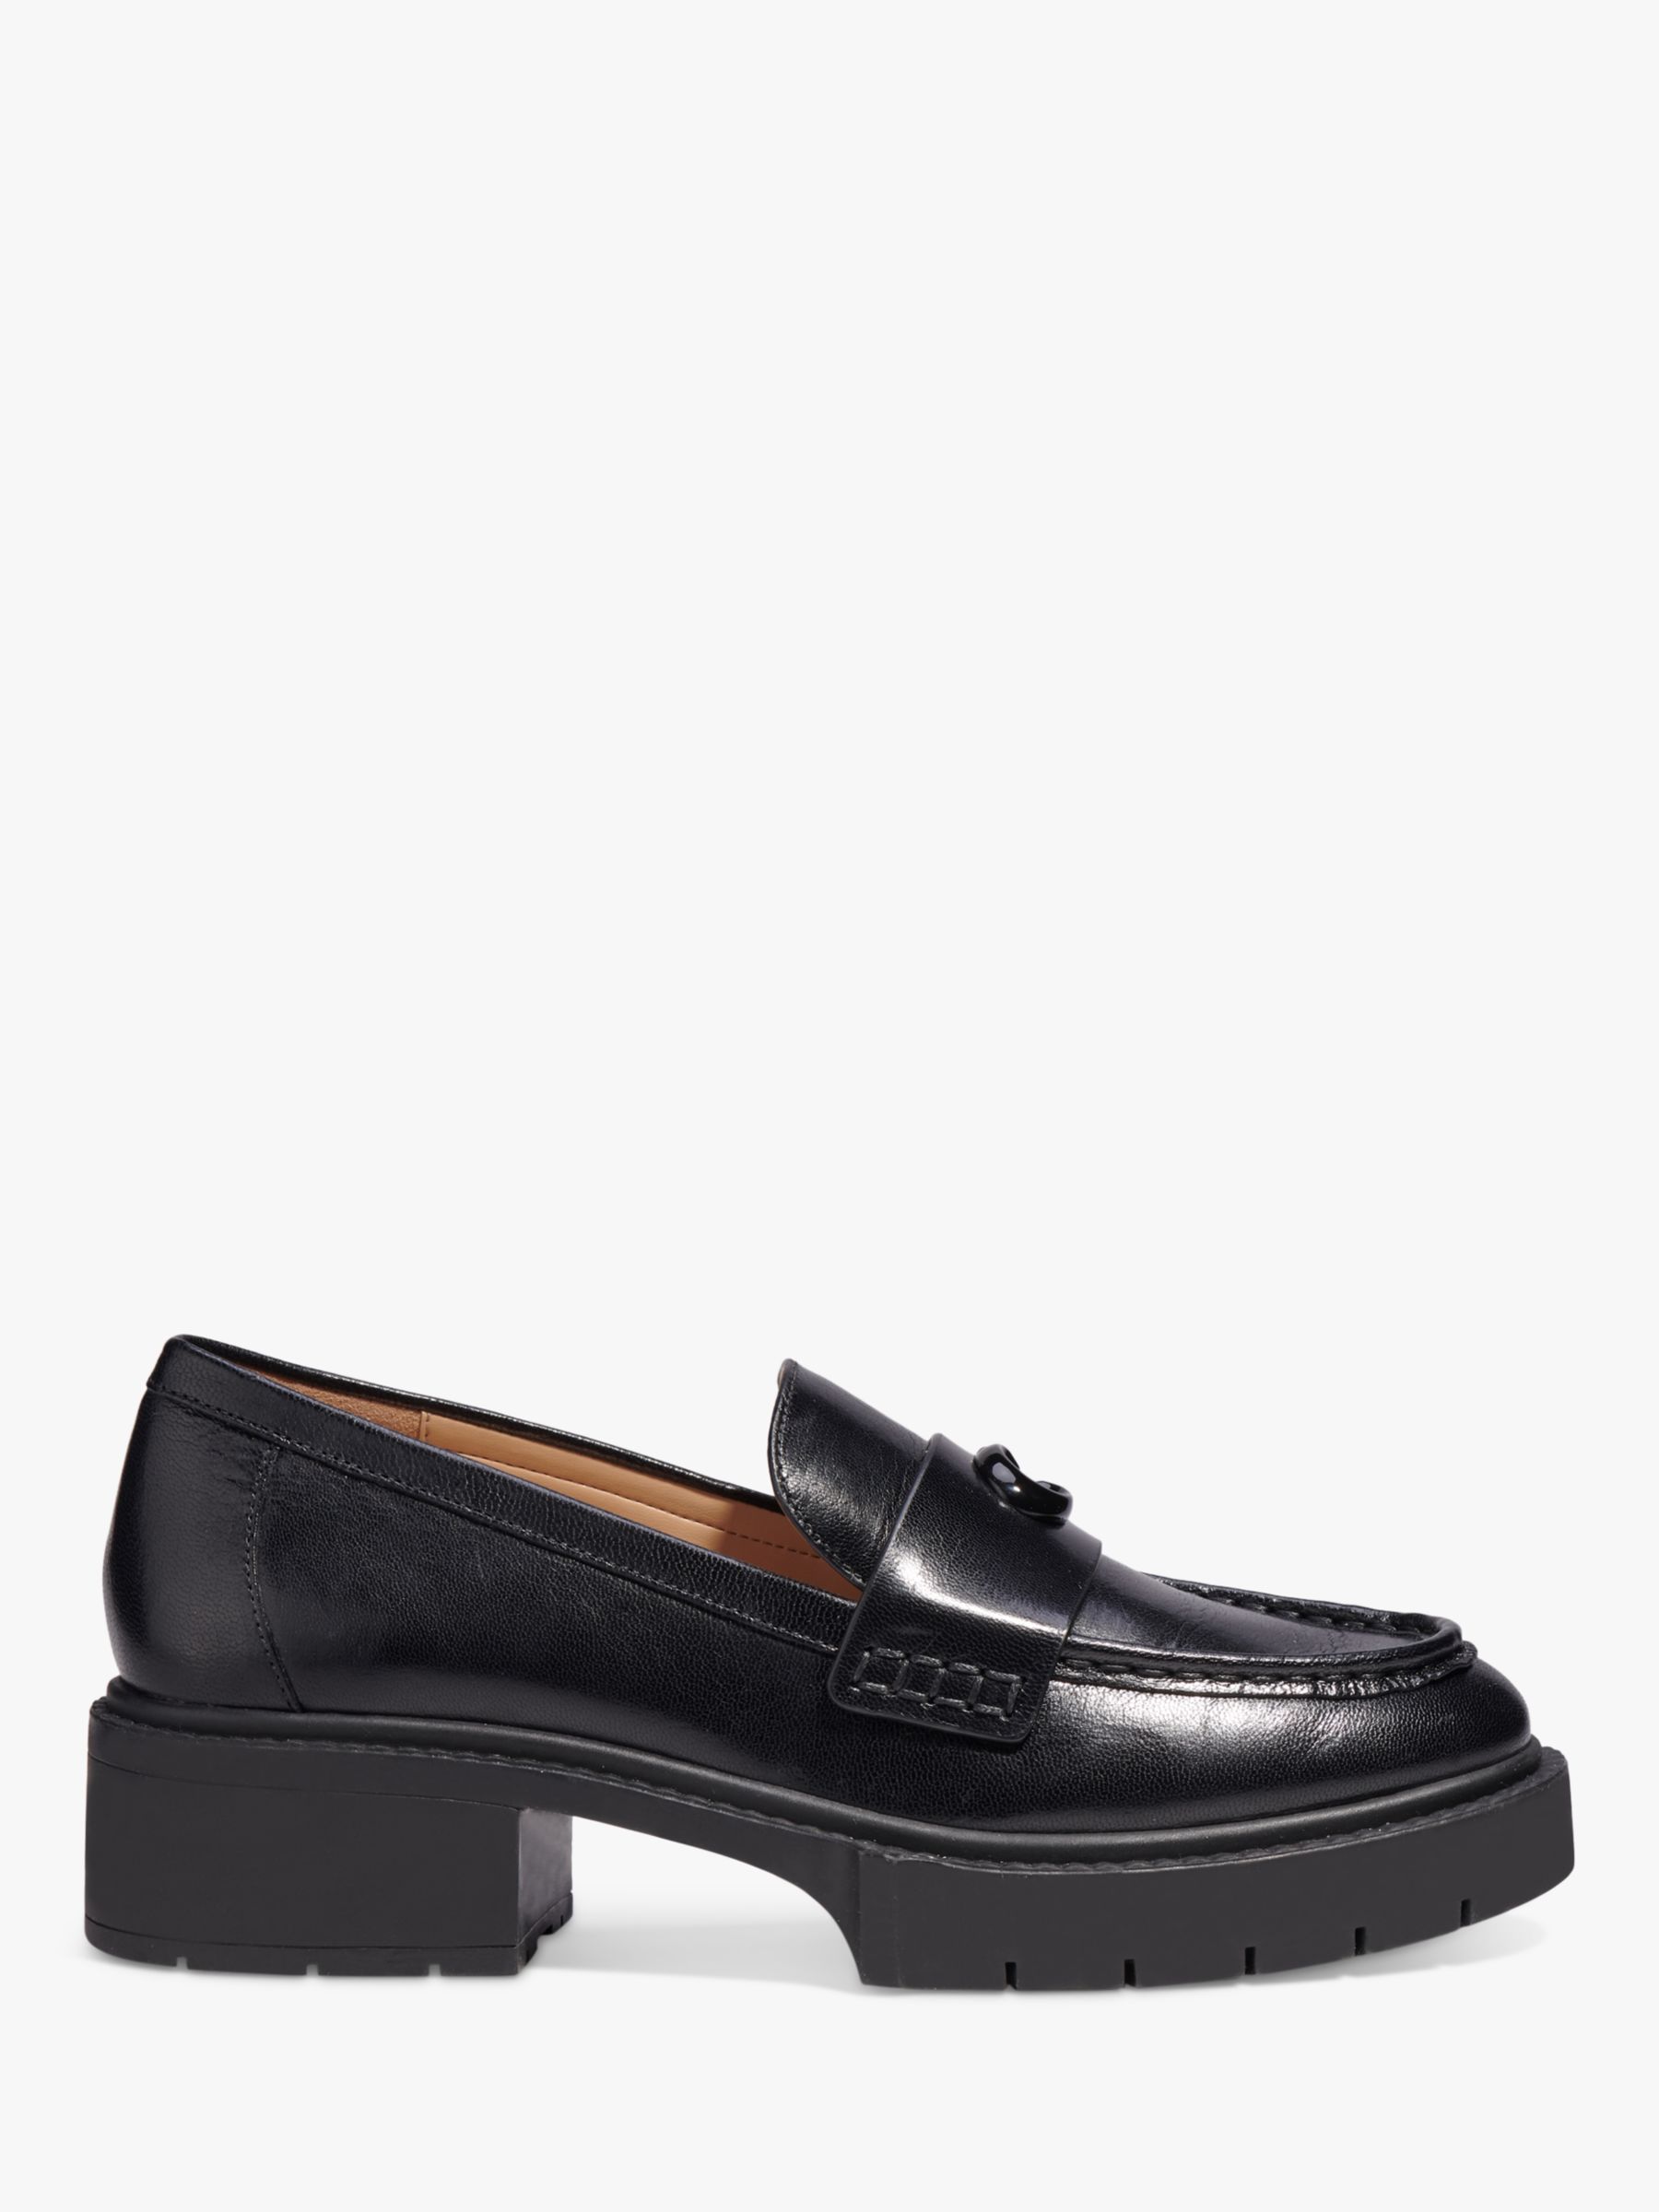 Coach Leah Leather Loafers, Black at John Lewis & Partners